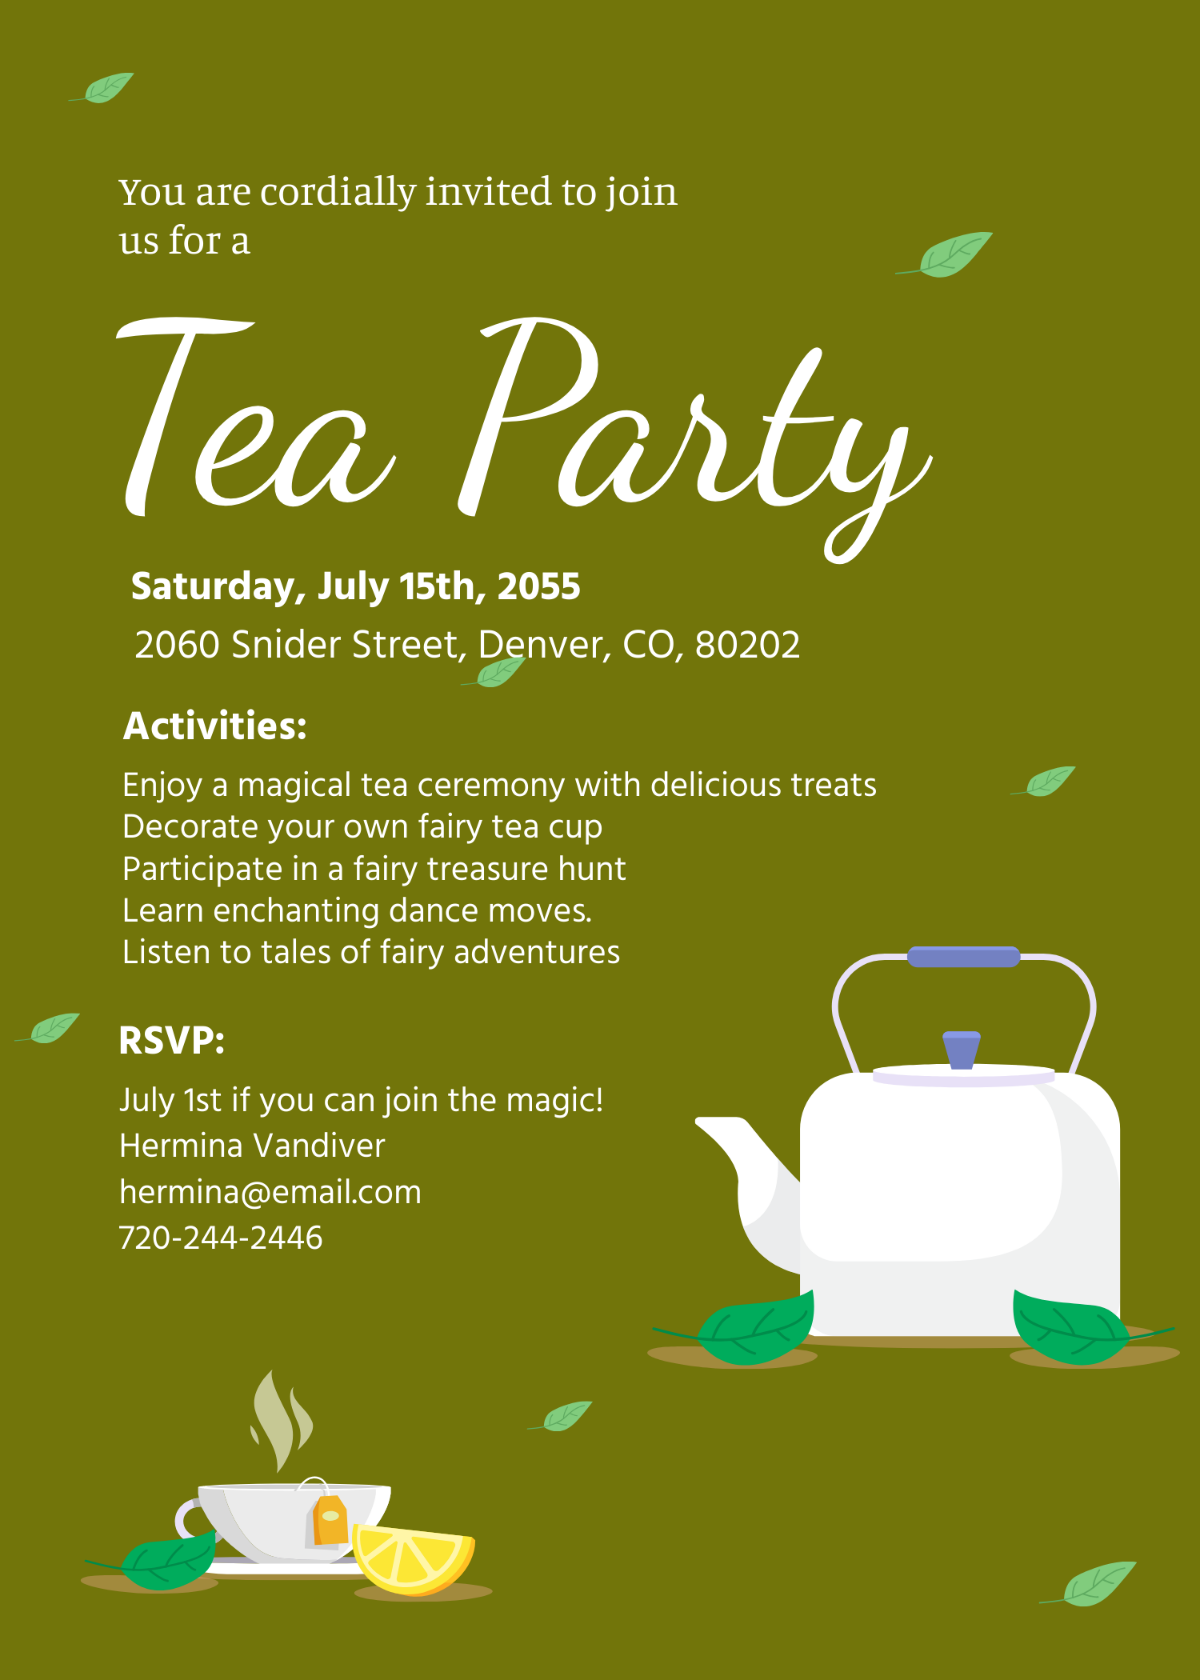 Tea Party Invitation For Kids